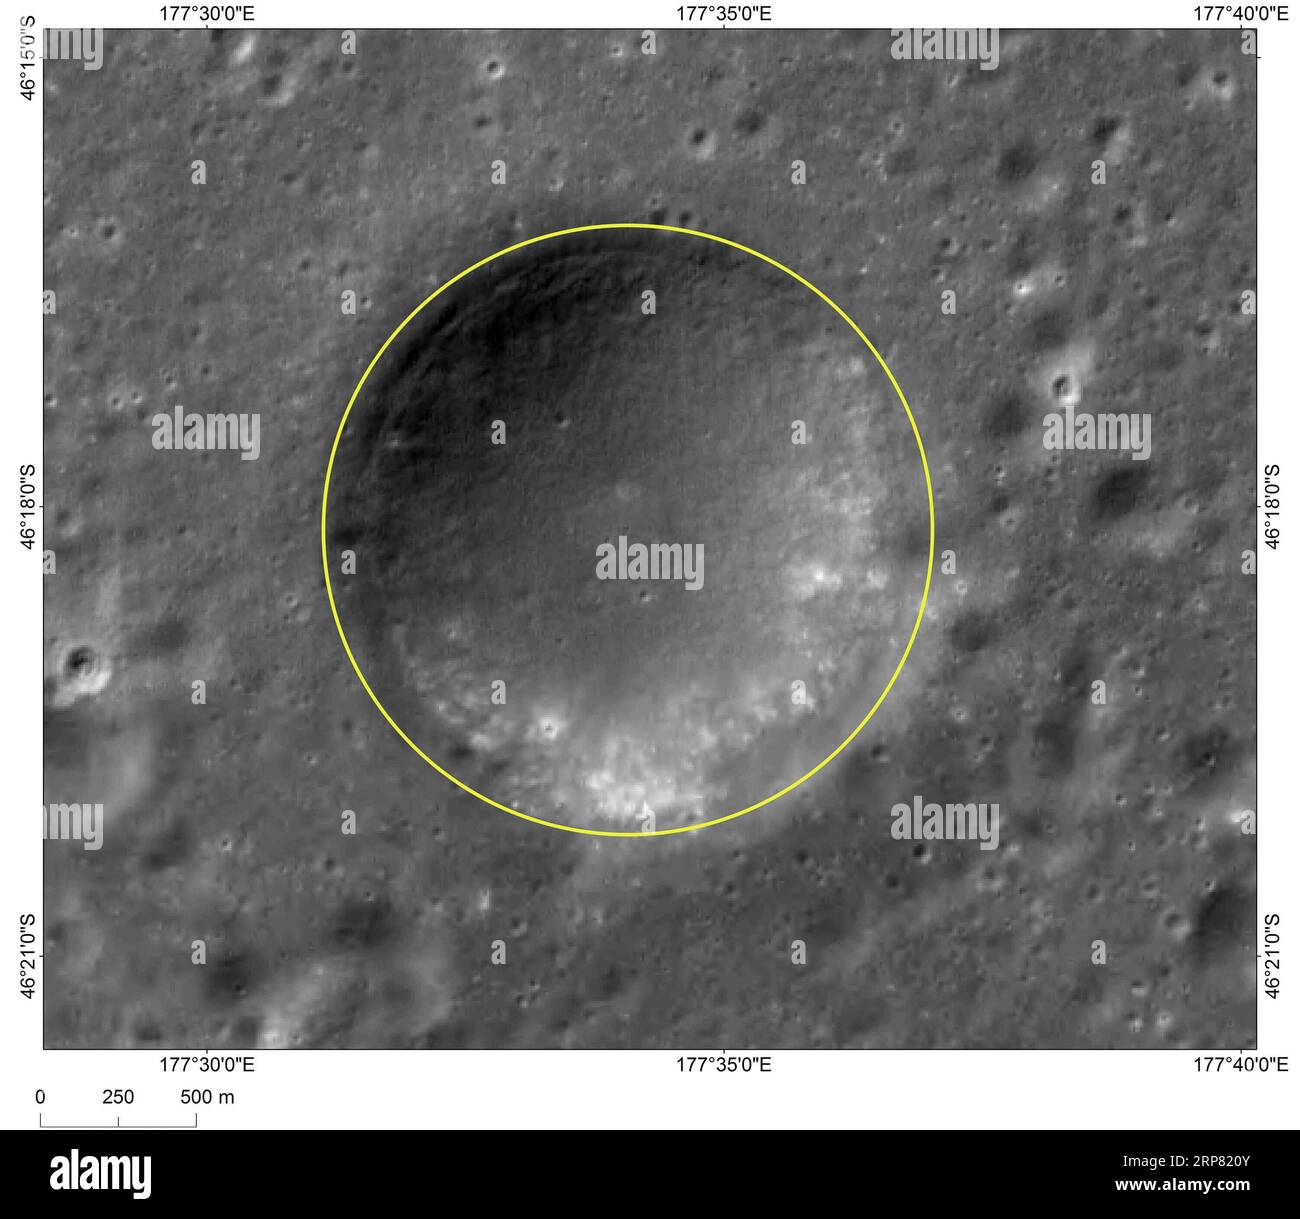 (190215) -- BEIJING, Feb. 15, 2019 (Xinhua) -- Photo provided by the China National Space Administration (CNSA) shows the image of Hegu, a crater near Statio Tianhe , the landing site of China s Chang e-4 lunar probe. The landing site of China s Chang e-4 lunar probe has been named Statio Tianhe after the spacecraft made the first-ever soft landing on the far side of the moon last month. Together with three nearby impact craters and one hill, the name was approved by the International Astronomical Union (IAU), Liu Jizhong, director of the China Lunar Exploration and Space Engineering Center of Stock Photo